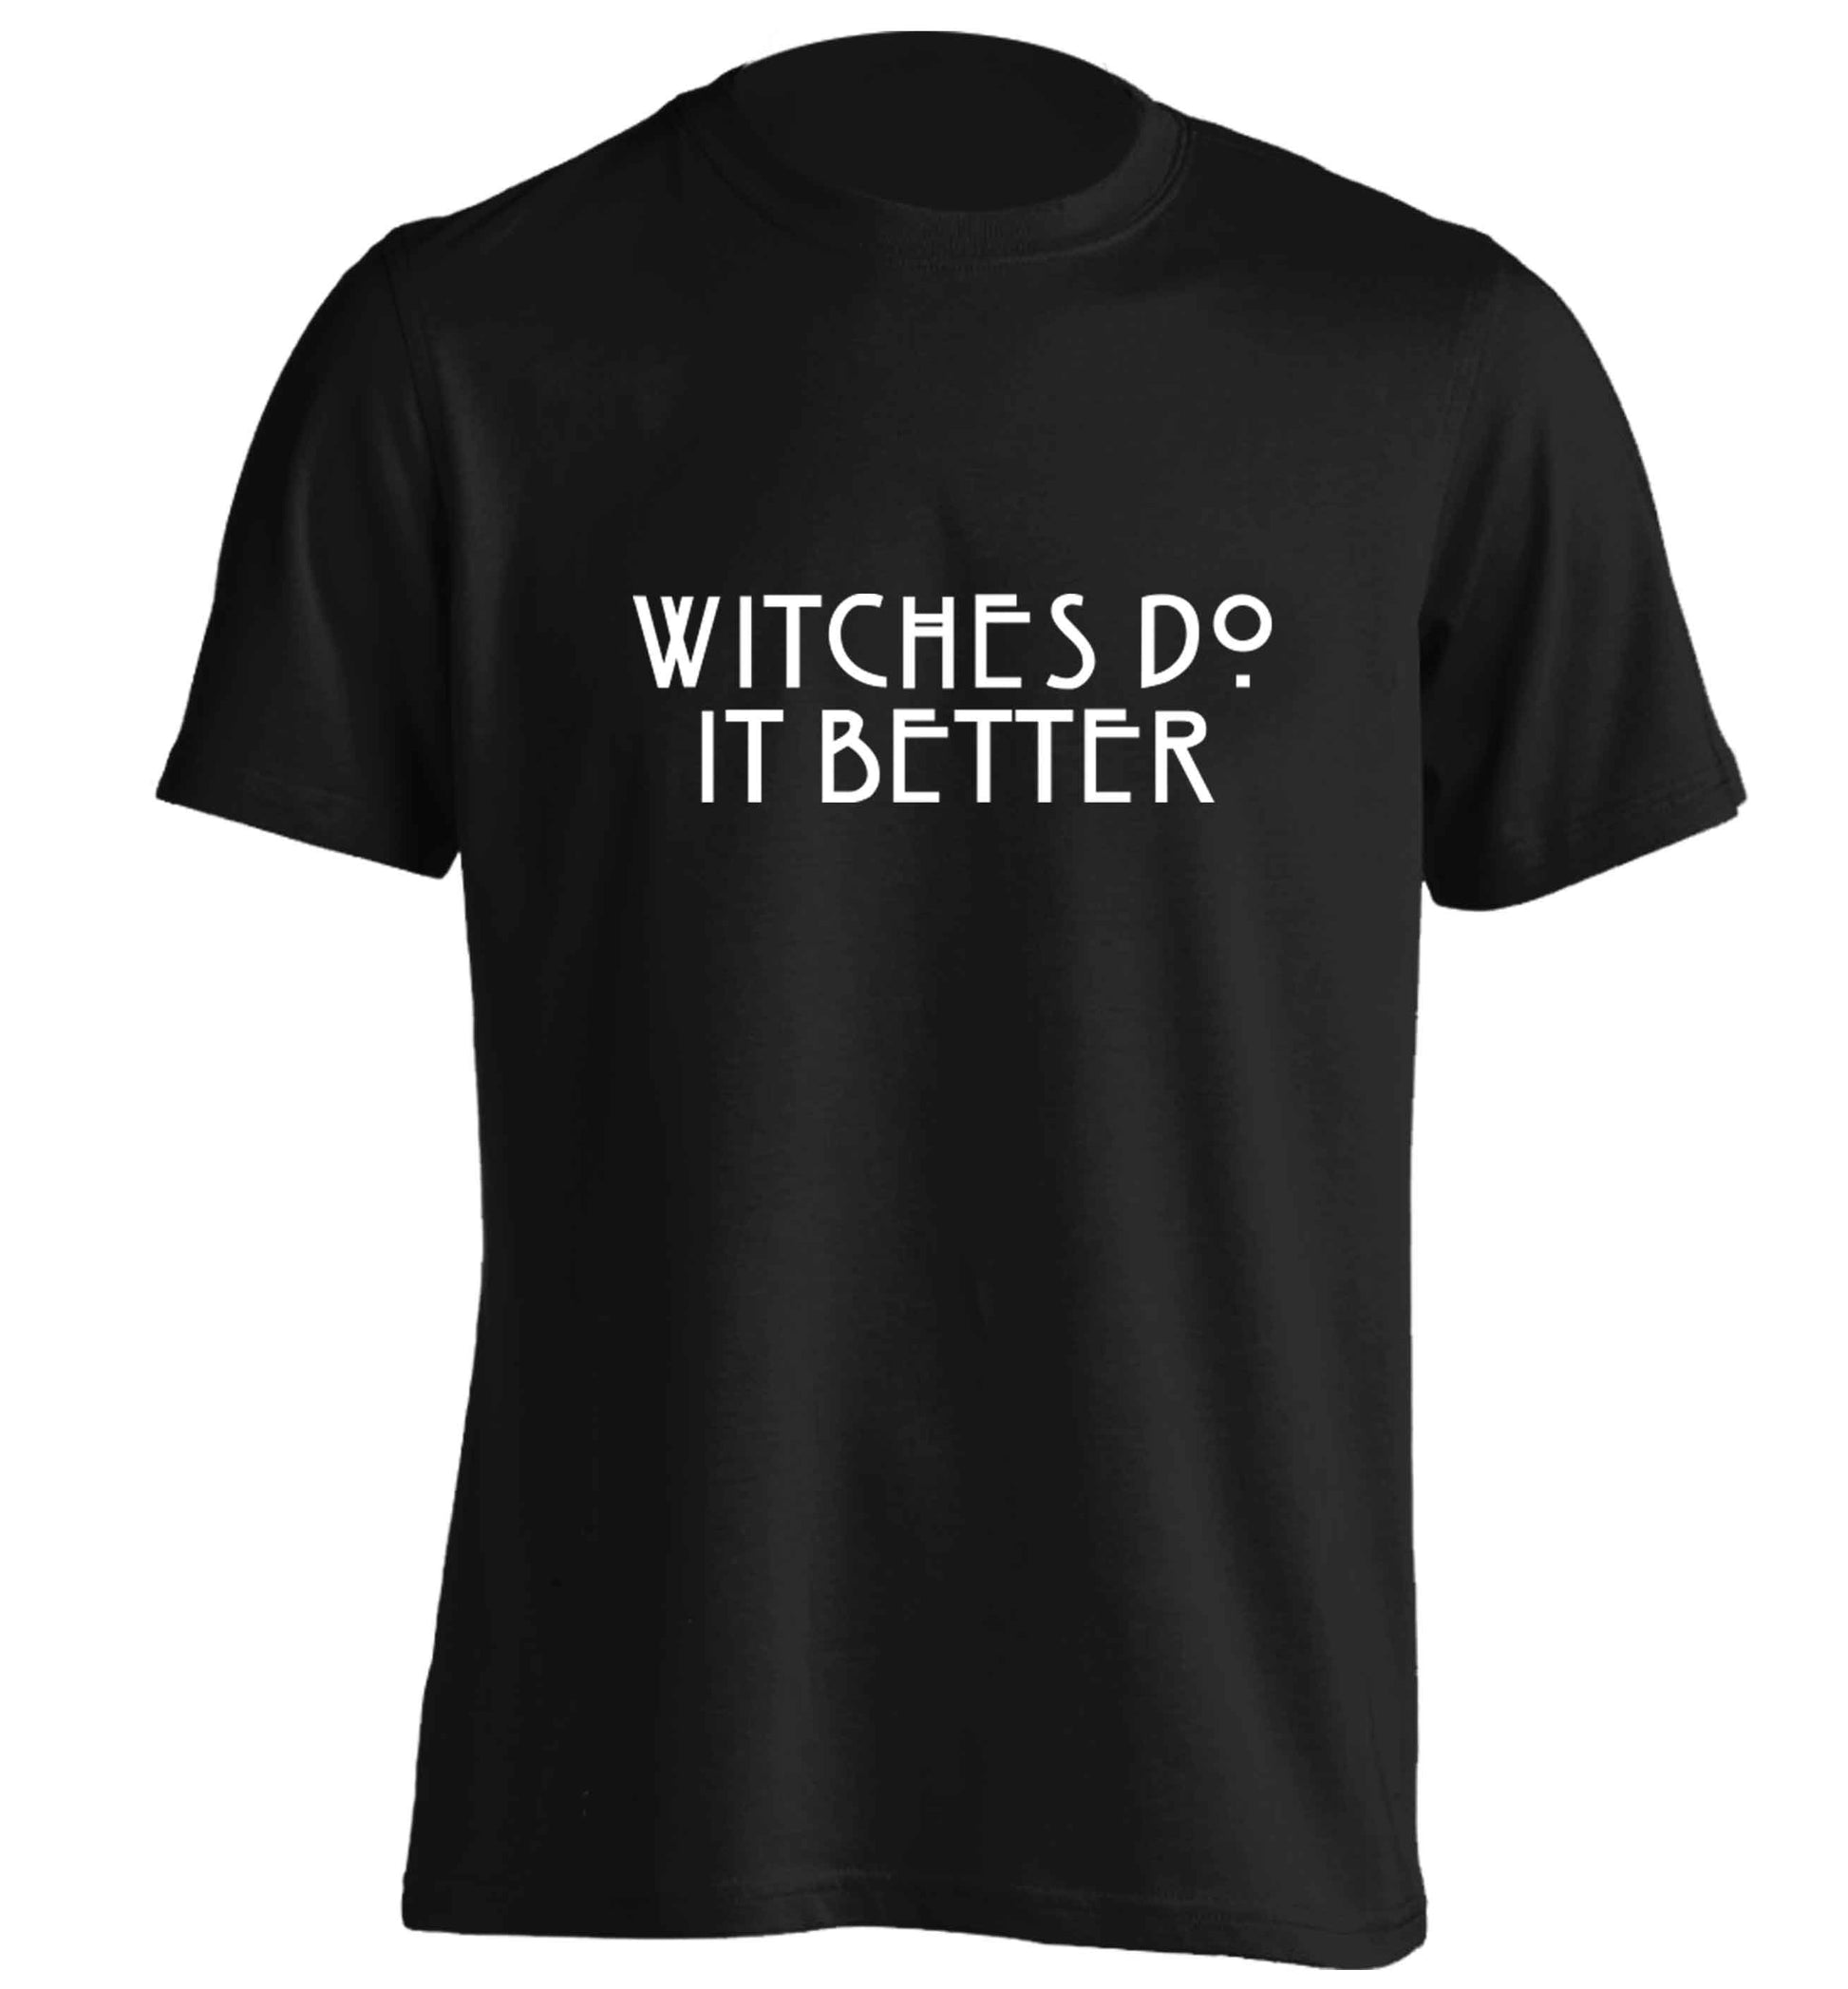 Witches do it better adults unisex black Tshirt 2XL